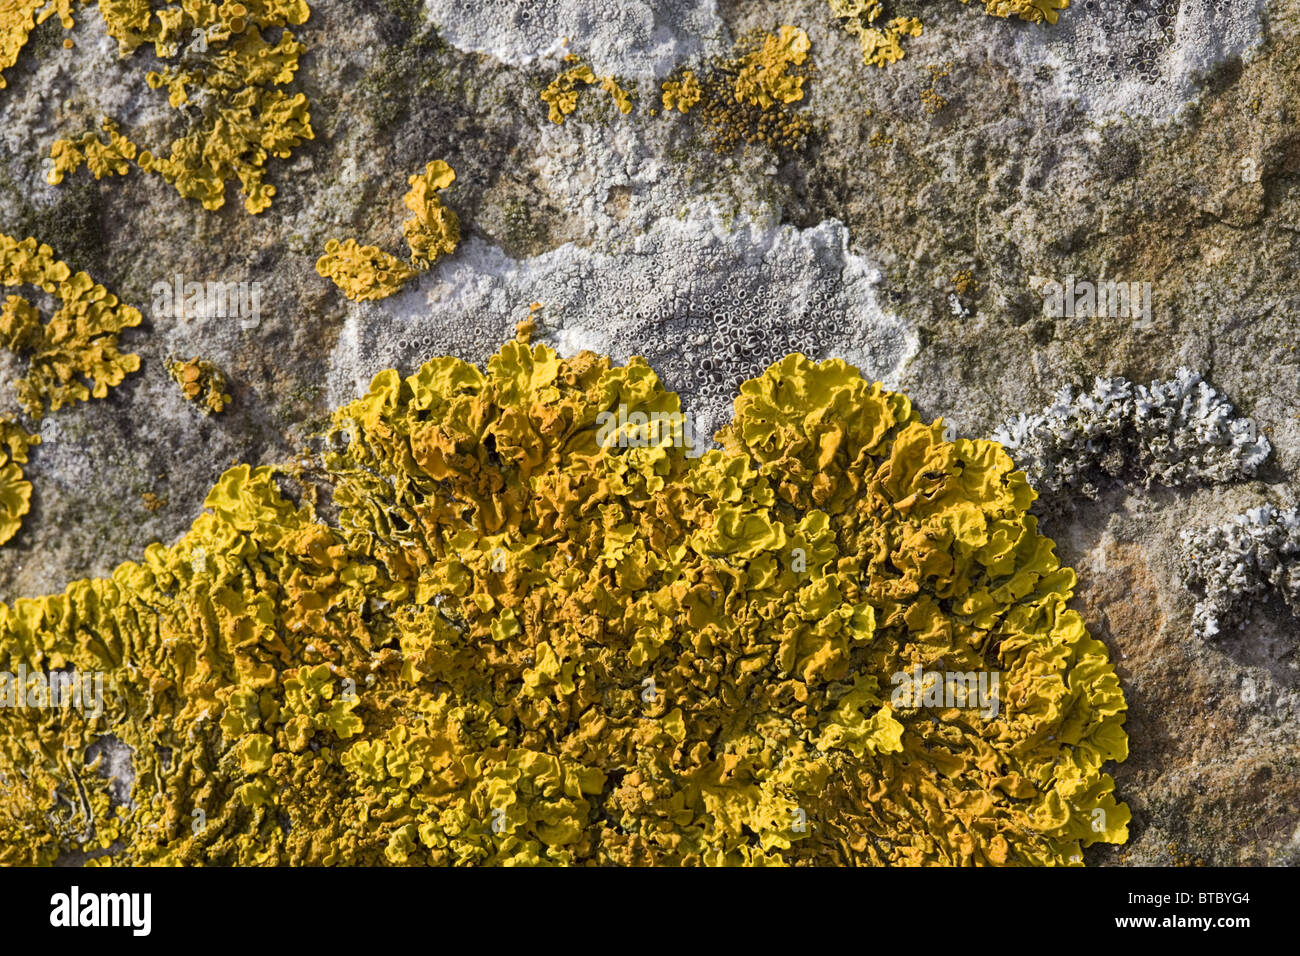 Basalt rock with close up of the lichens Xanthoria calcicola (yellow) and Lecanora chlarotera (white), Streefkerk, Netherlands Stock Photo